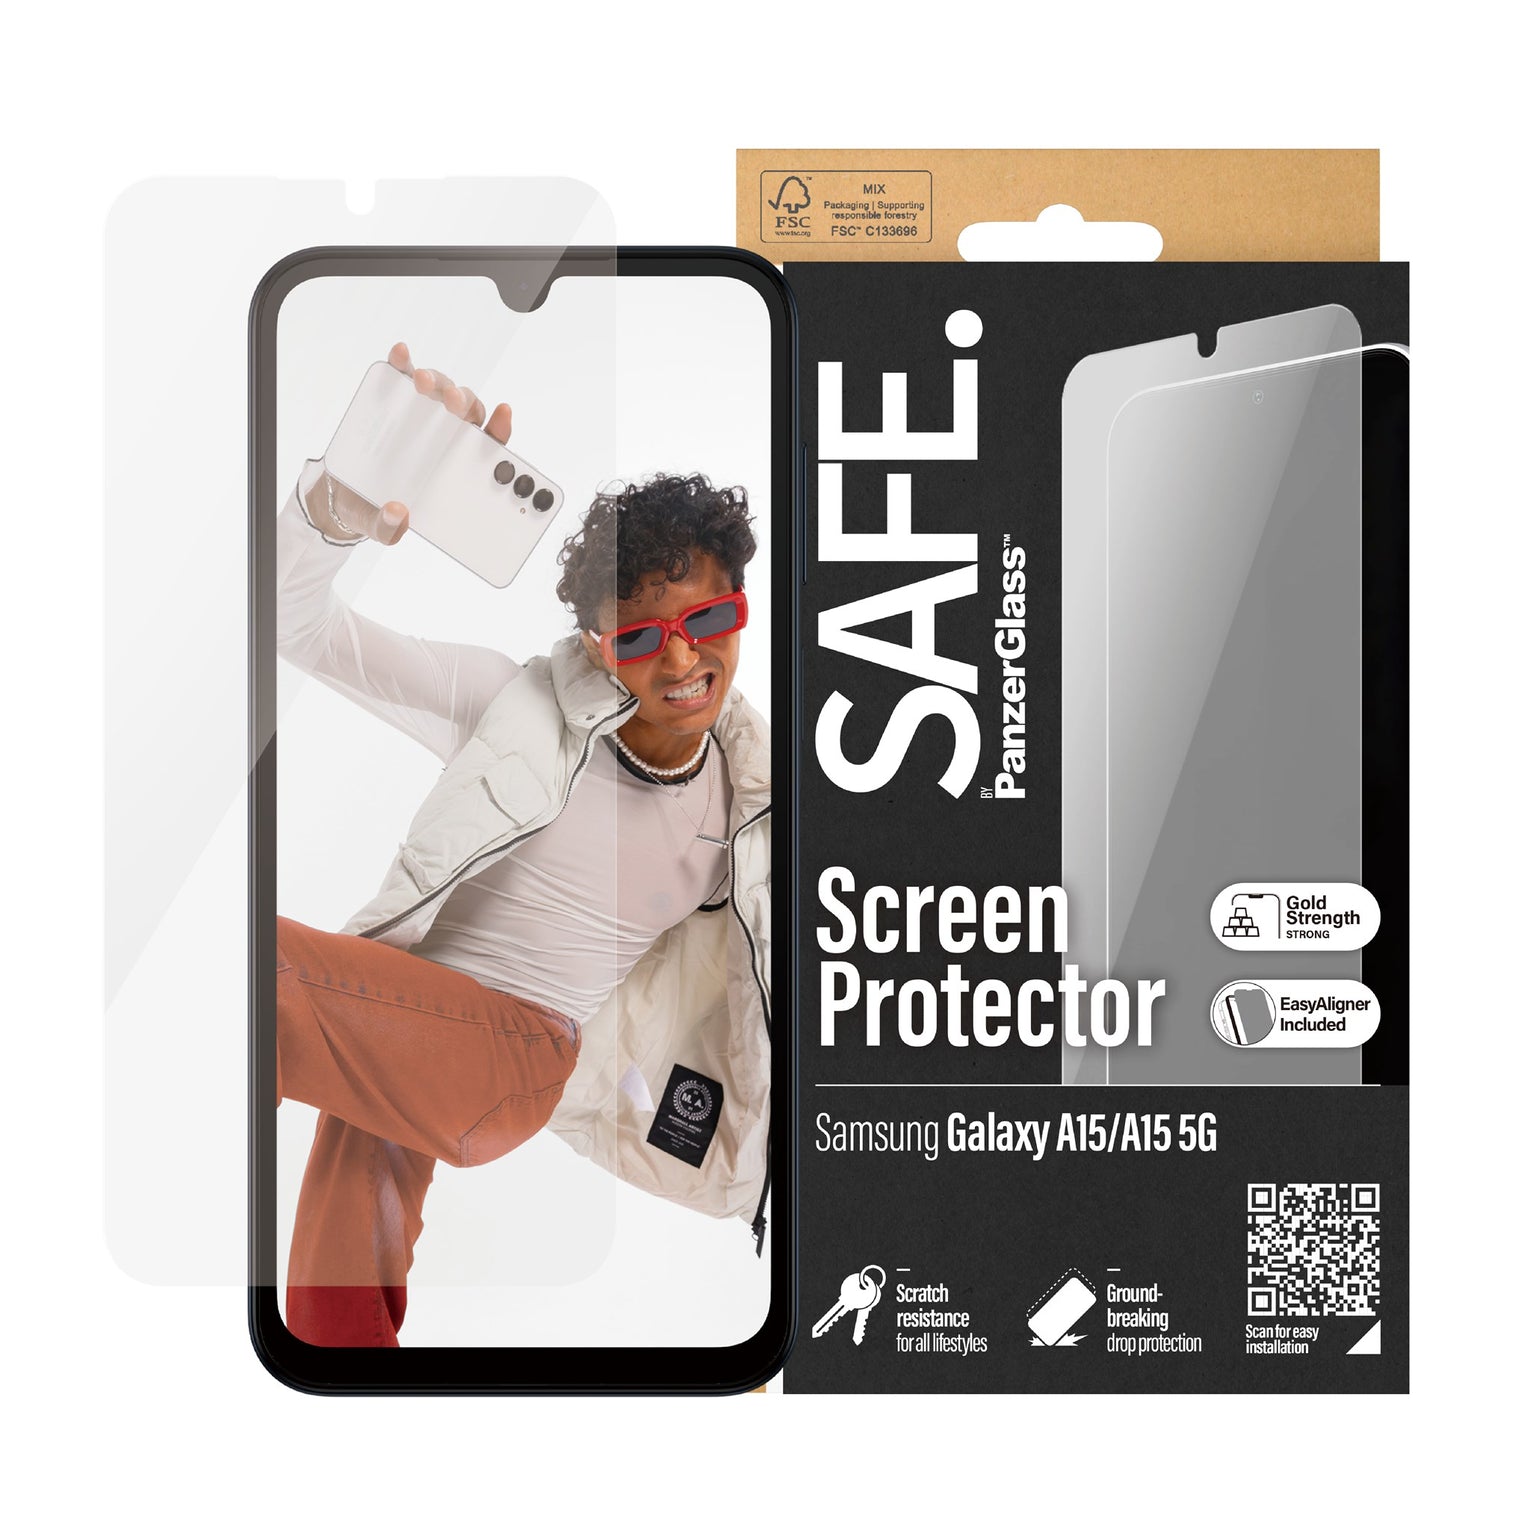 Samsung Galaxy A15 Screen Protector Ultra Wide Fit (with EasyAligner)